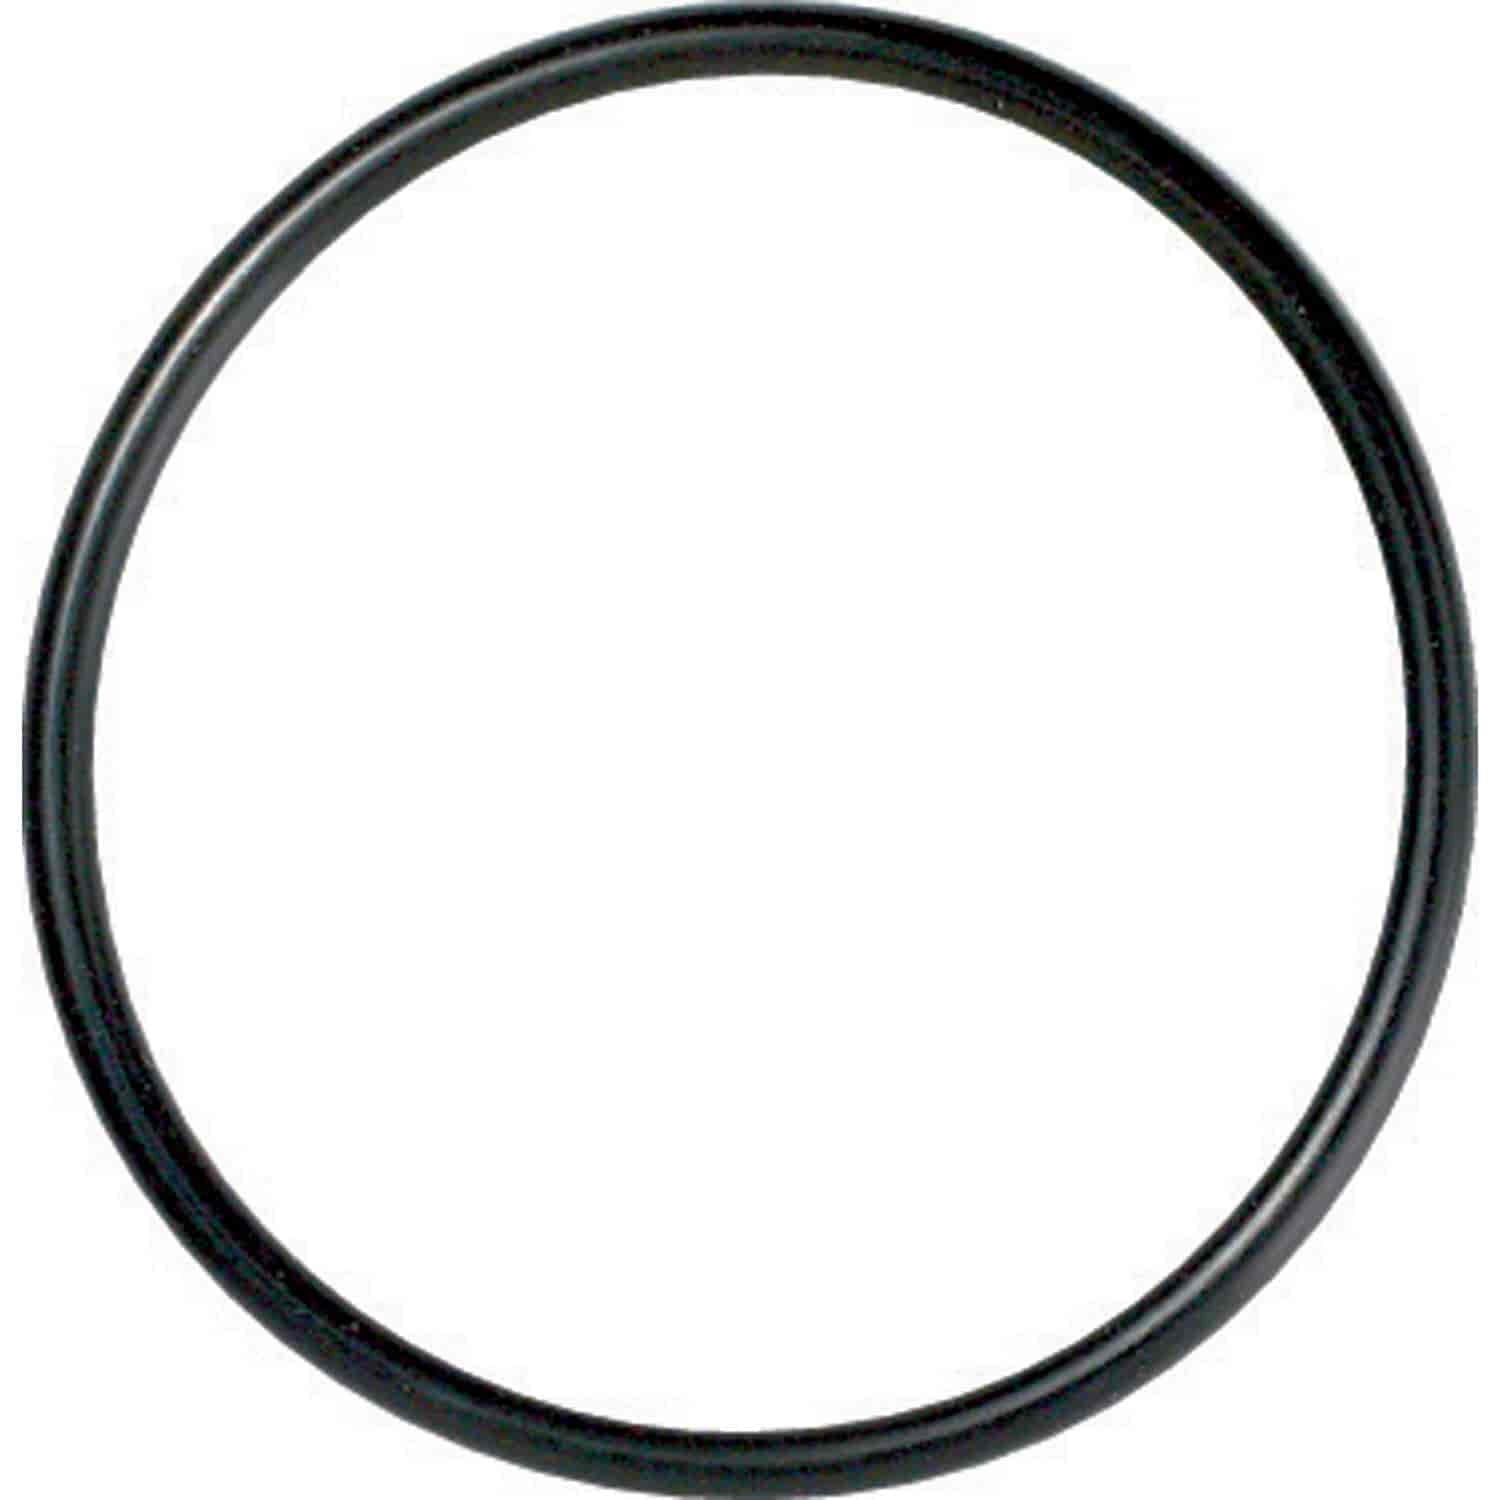 Thermostat O-Ring 2.359" ID/2.637" OD